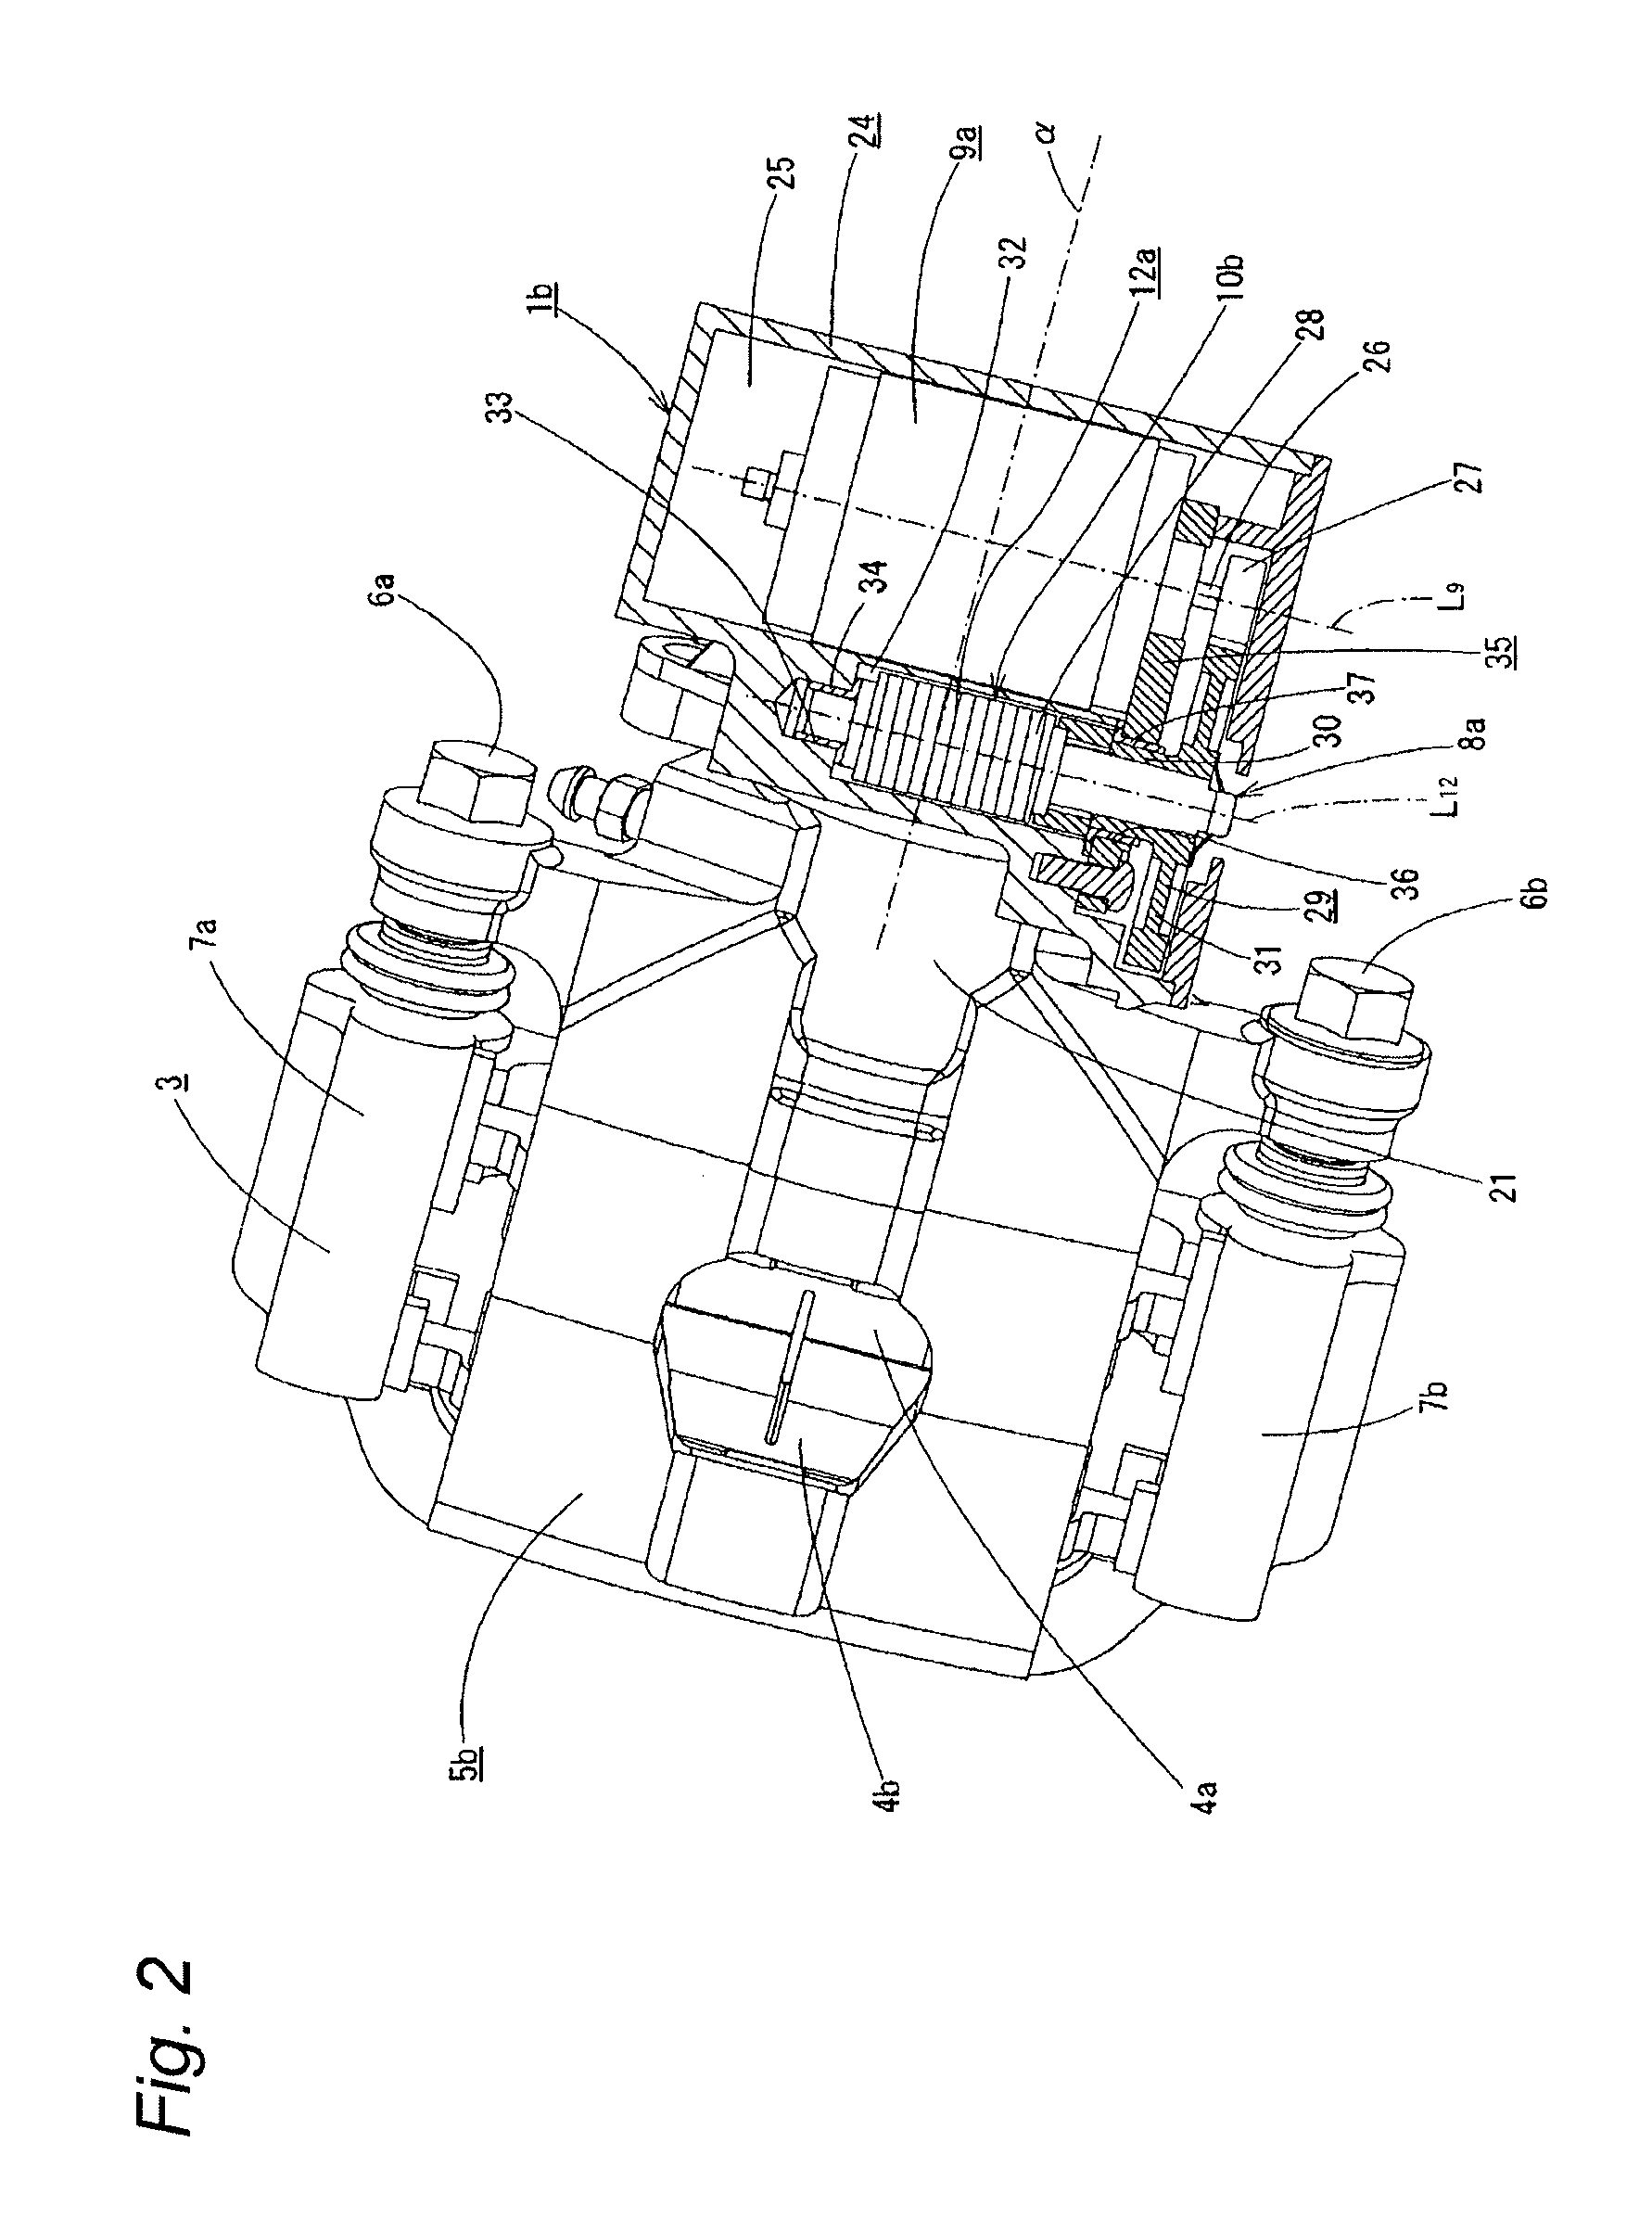 Disc brake apparatus with electric parking mechanism